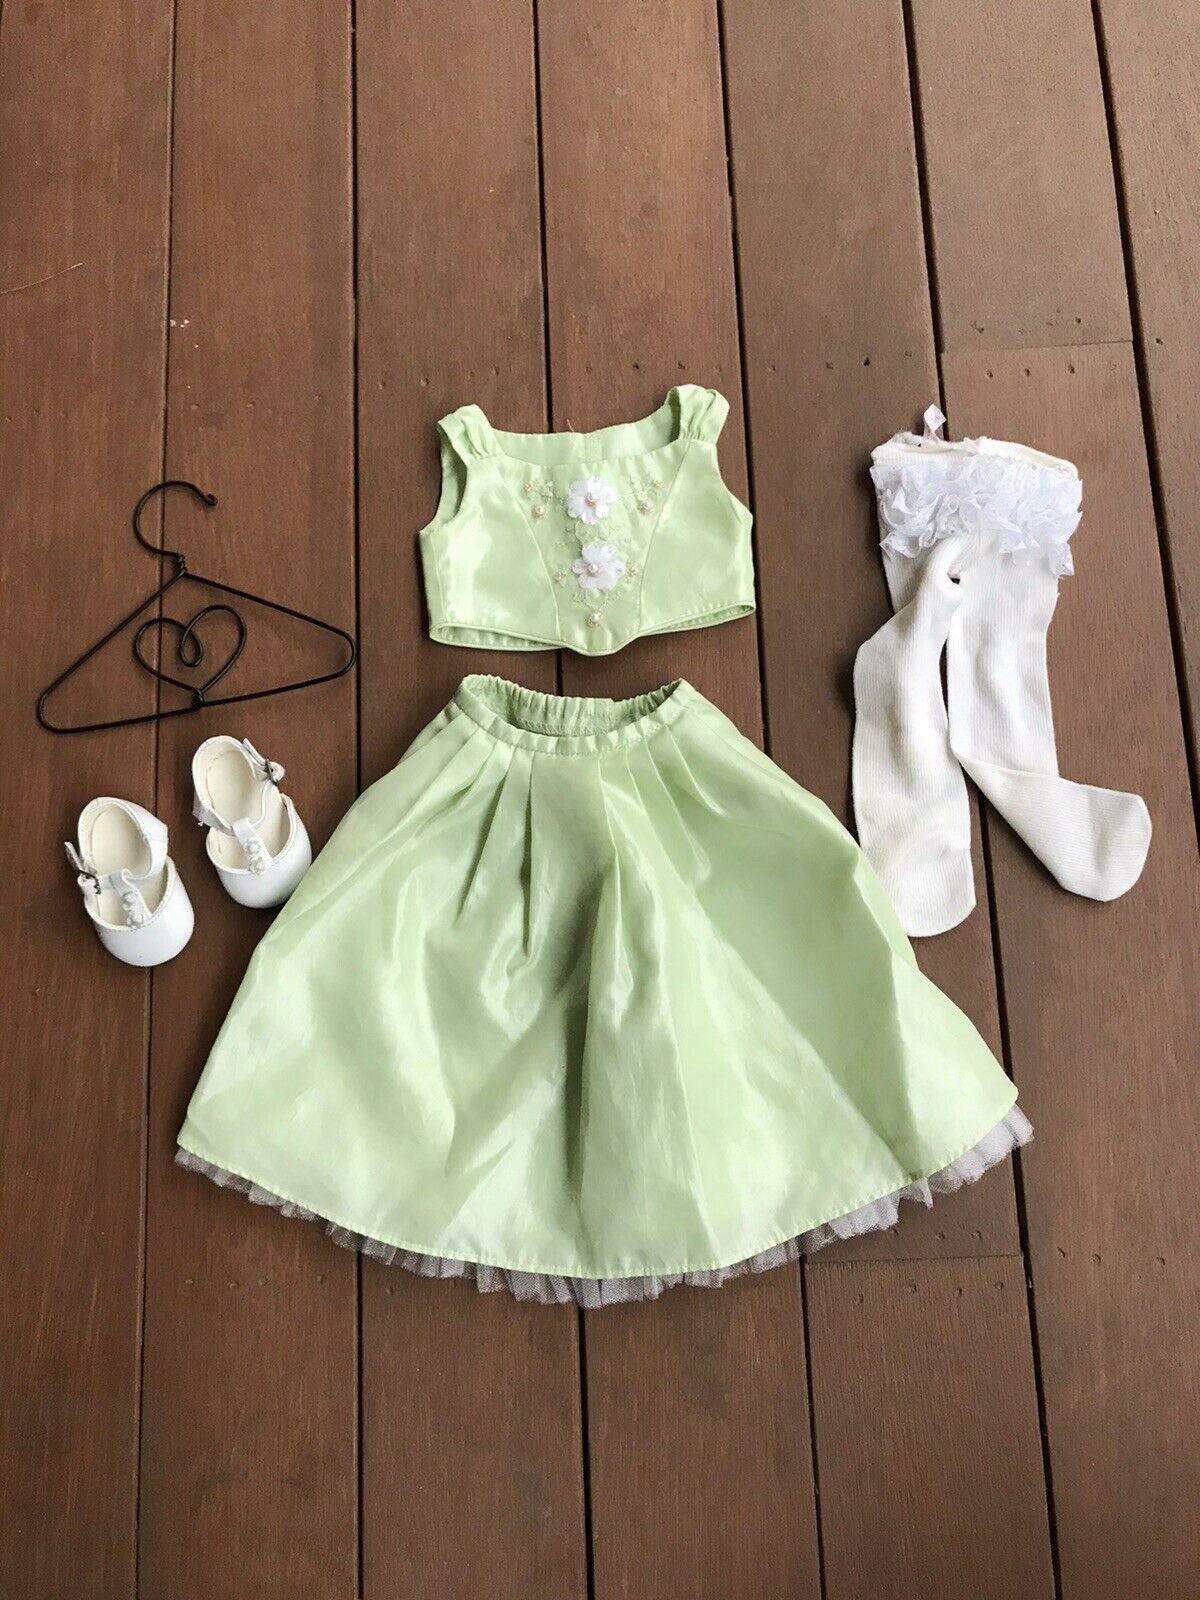 Retired American Girl Doll Junior Bridesmaid Outfit with Hanger